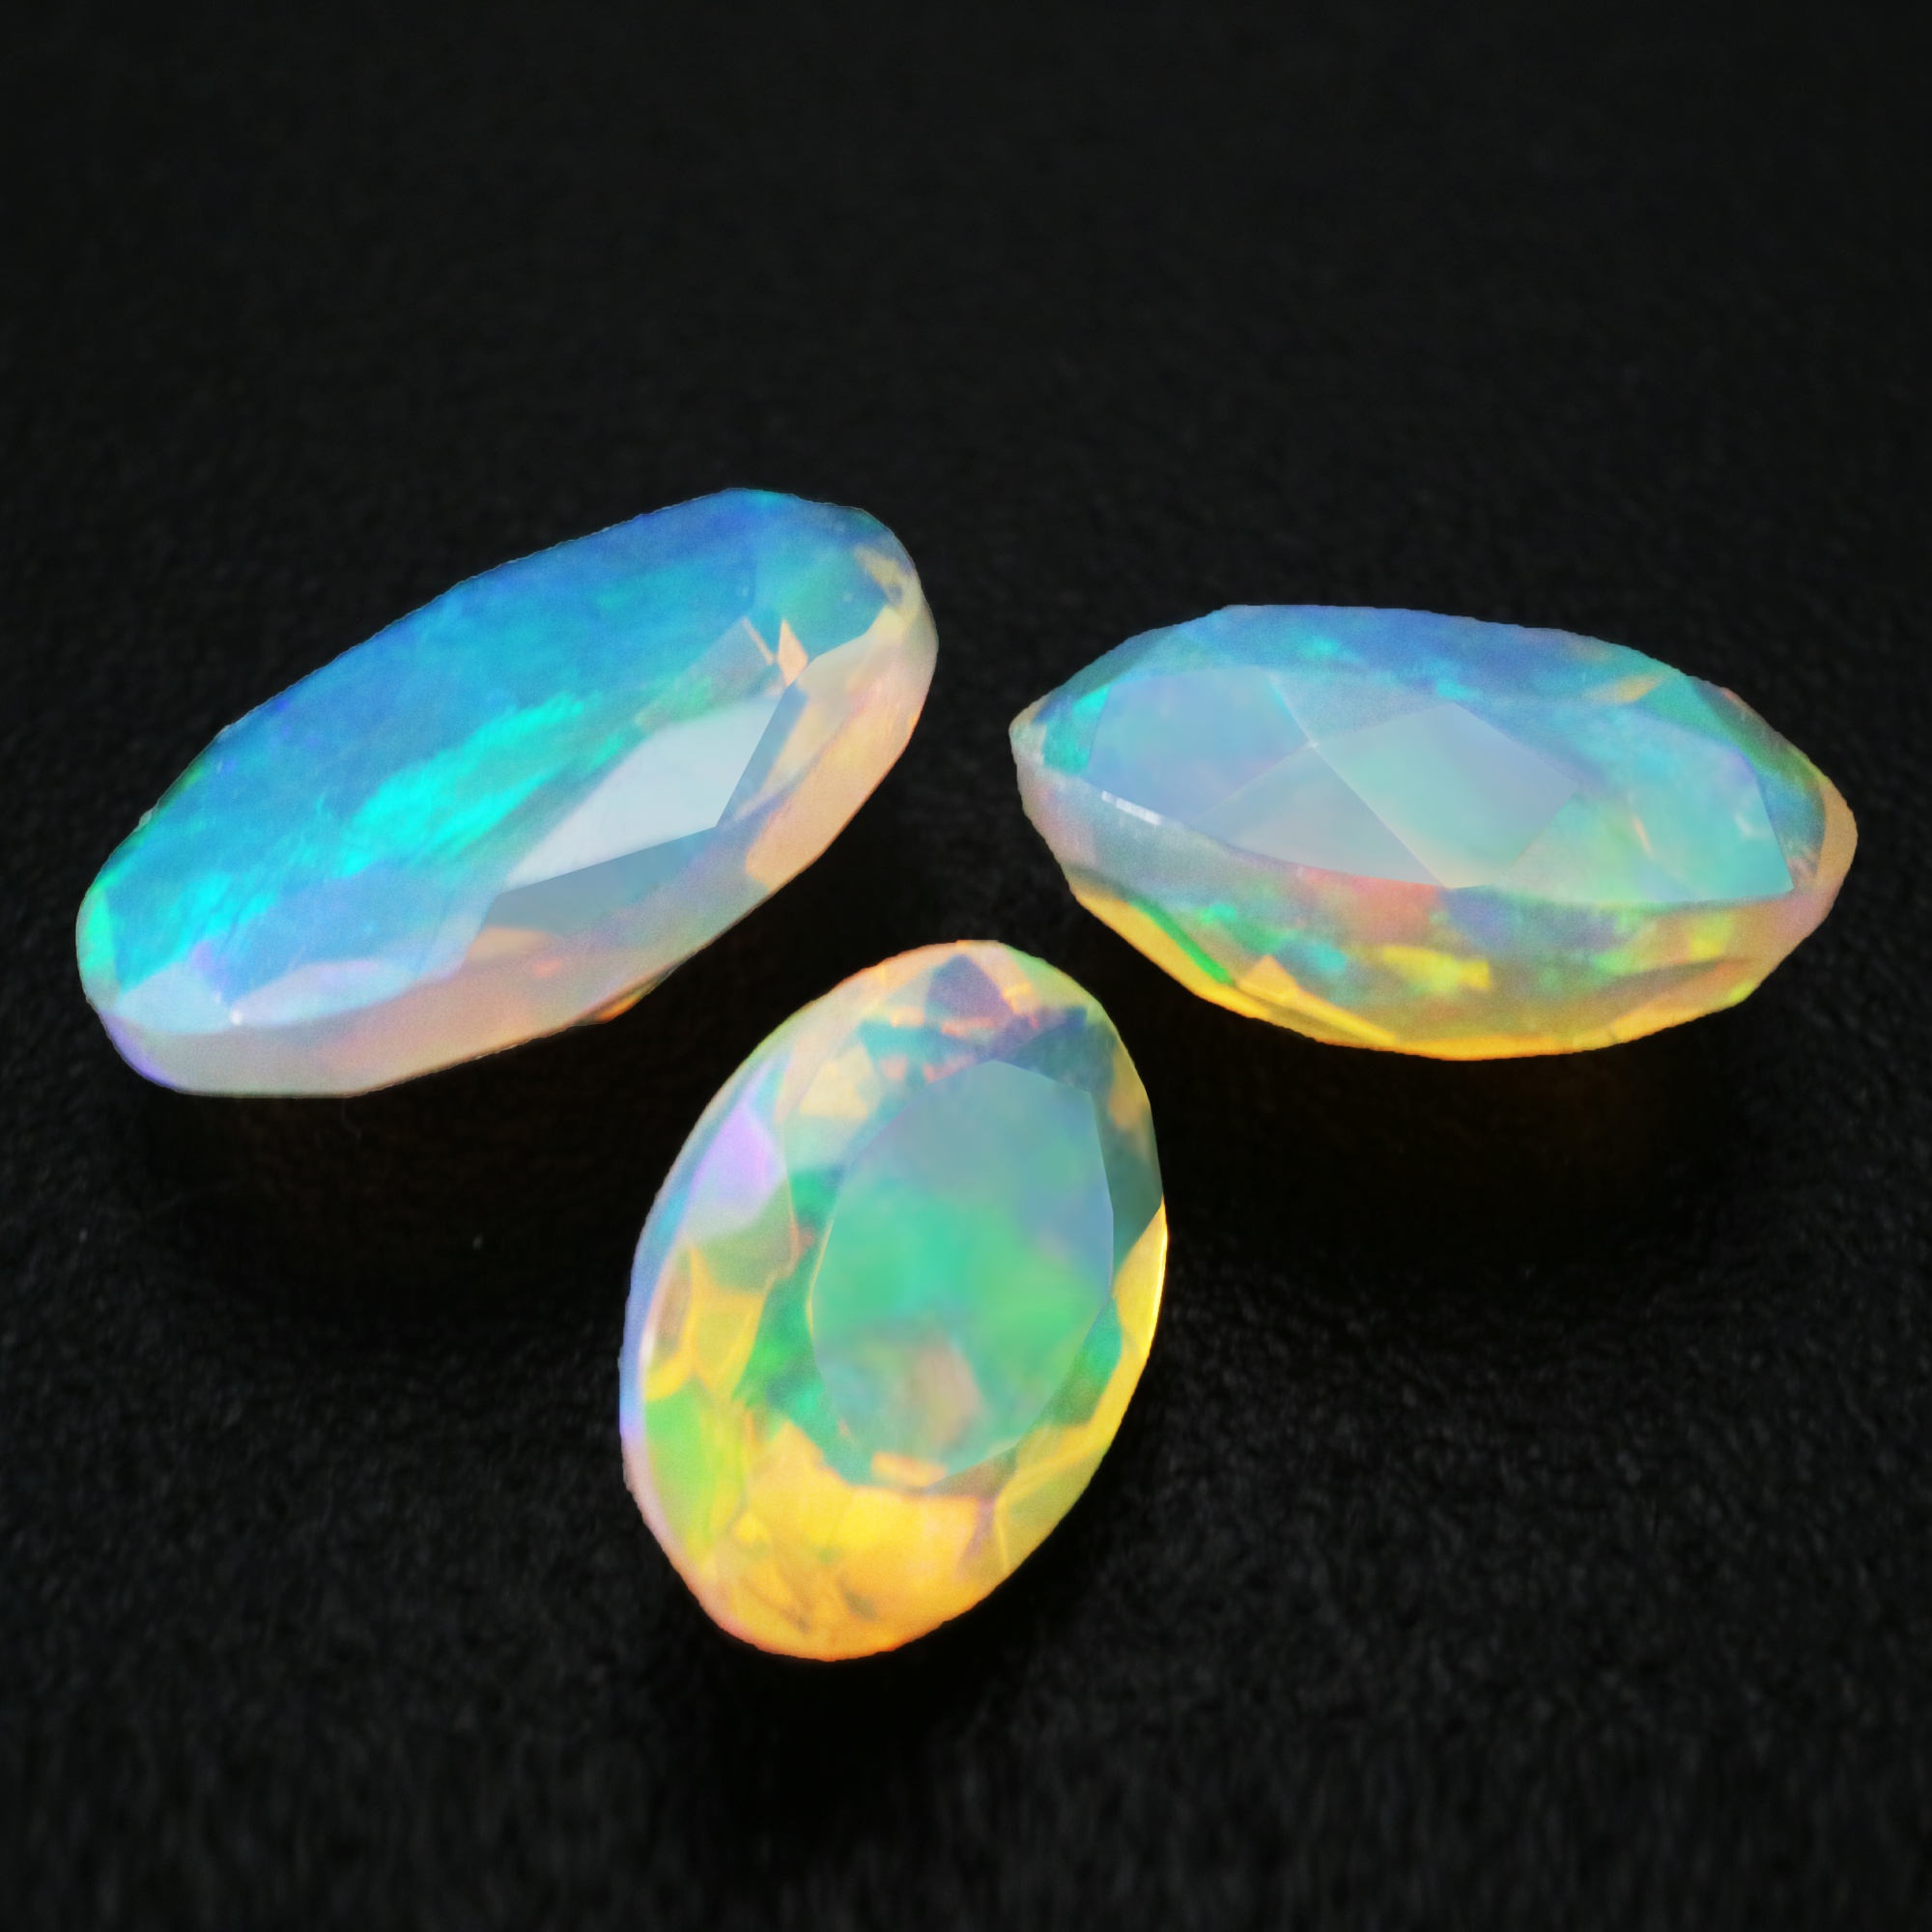 1Pcs Oval Africa Opal October Birthstone Color Changing Faceted Cut AAA Grade Loose Gemstone Natural Semi Precious Stone DIY Jewelry Supplies 4120133 - Click Image to Close